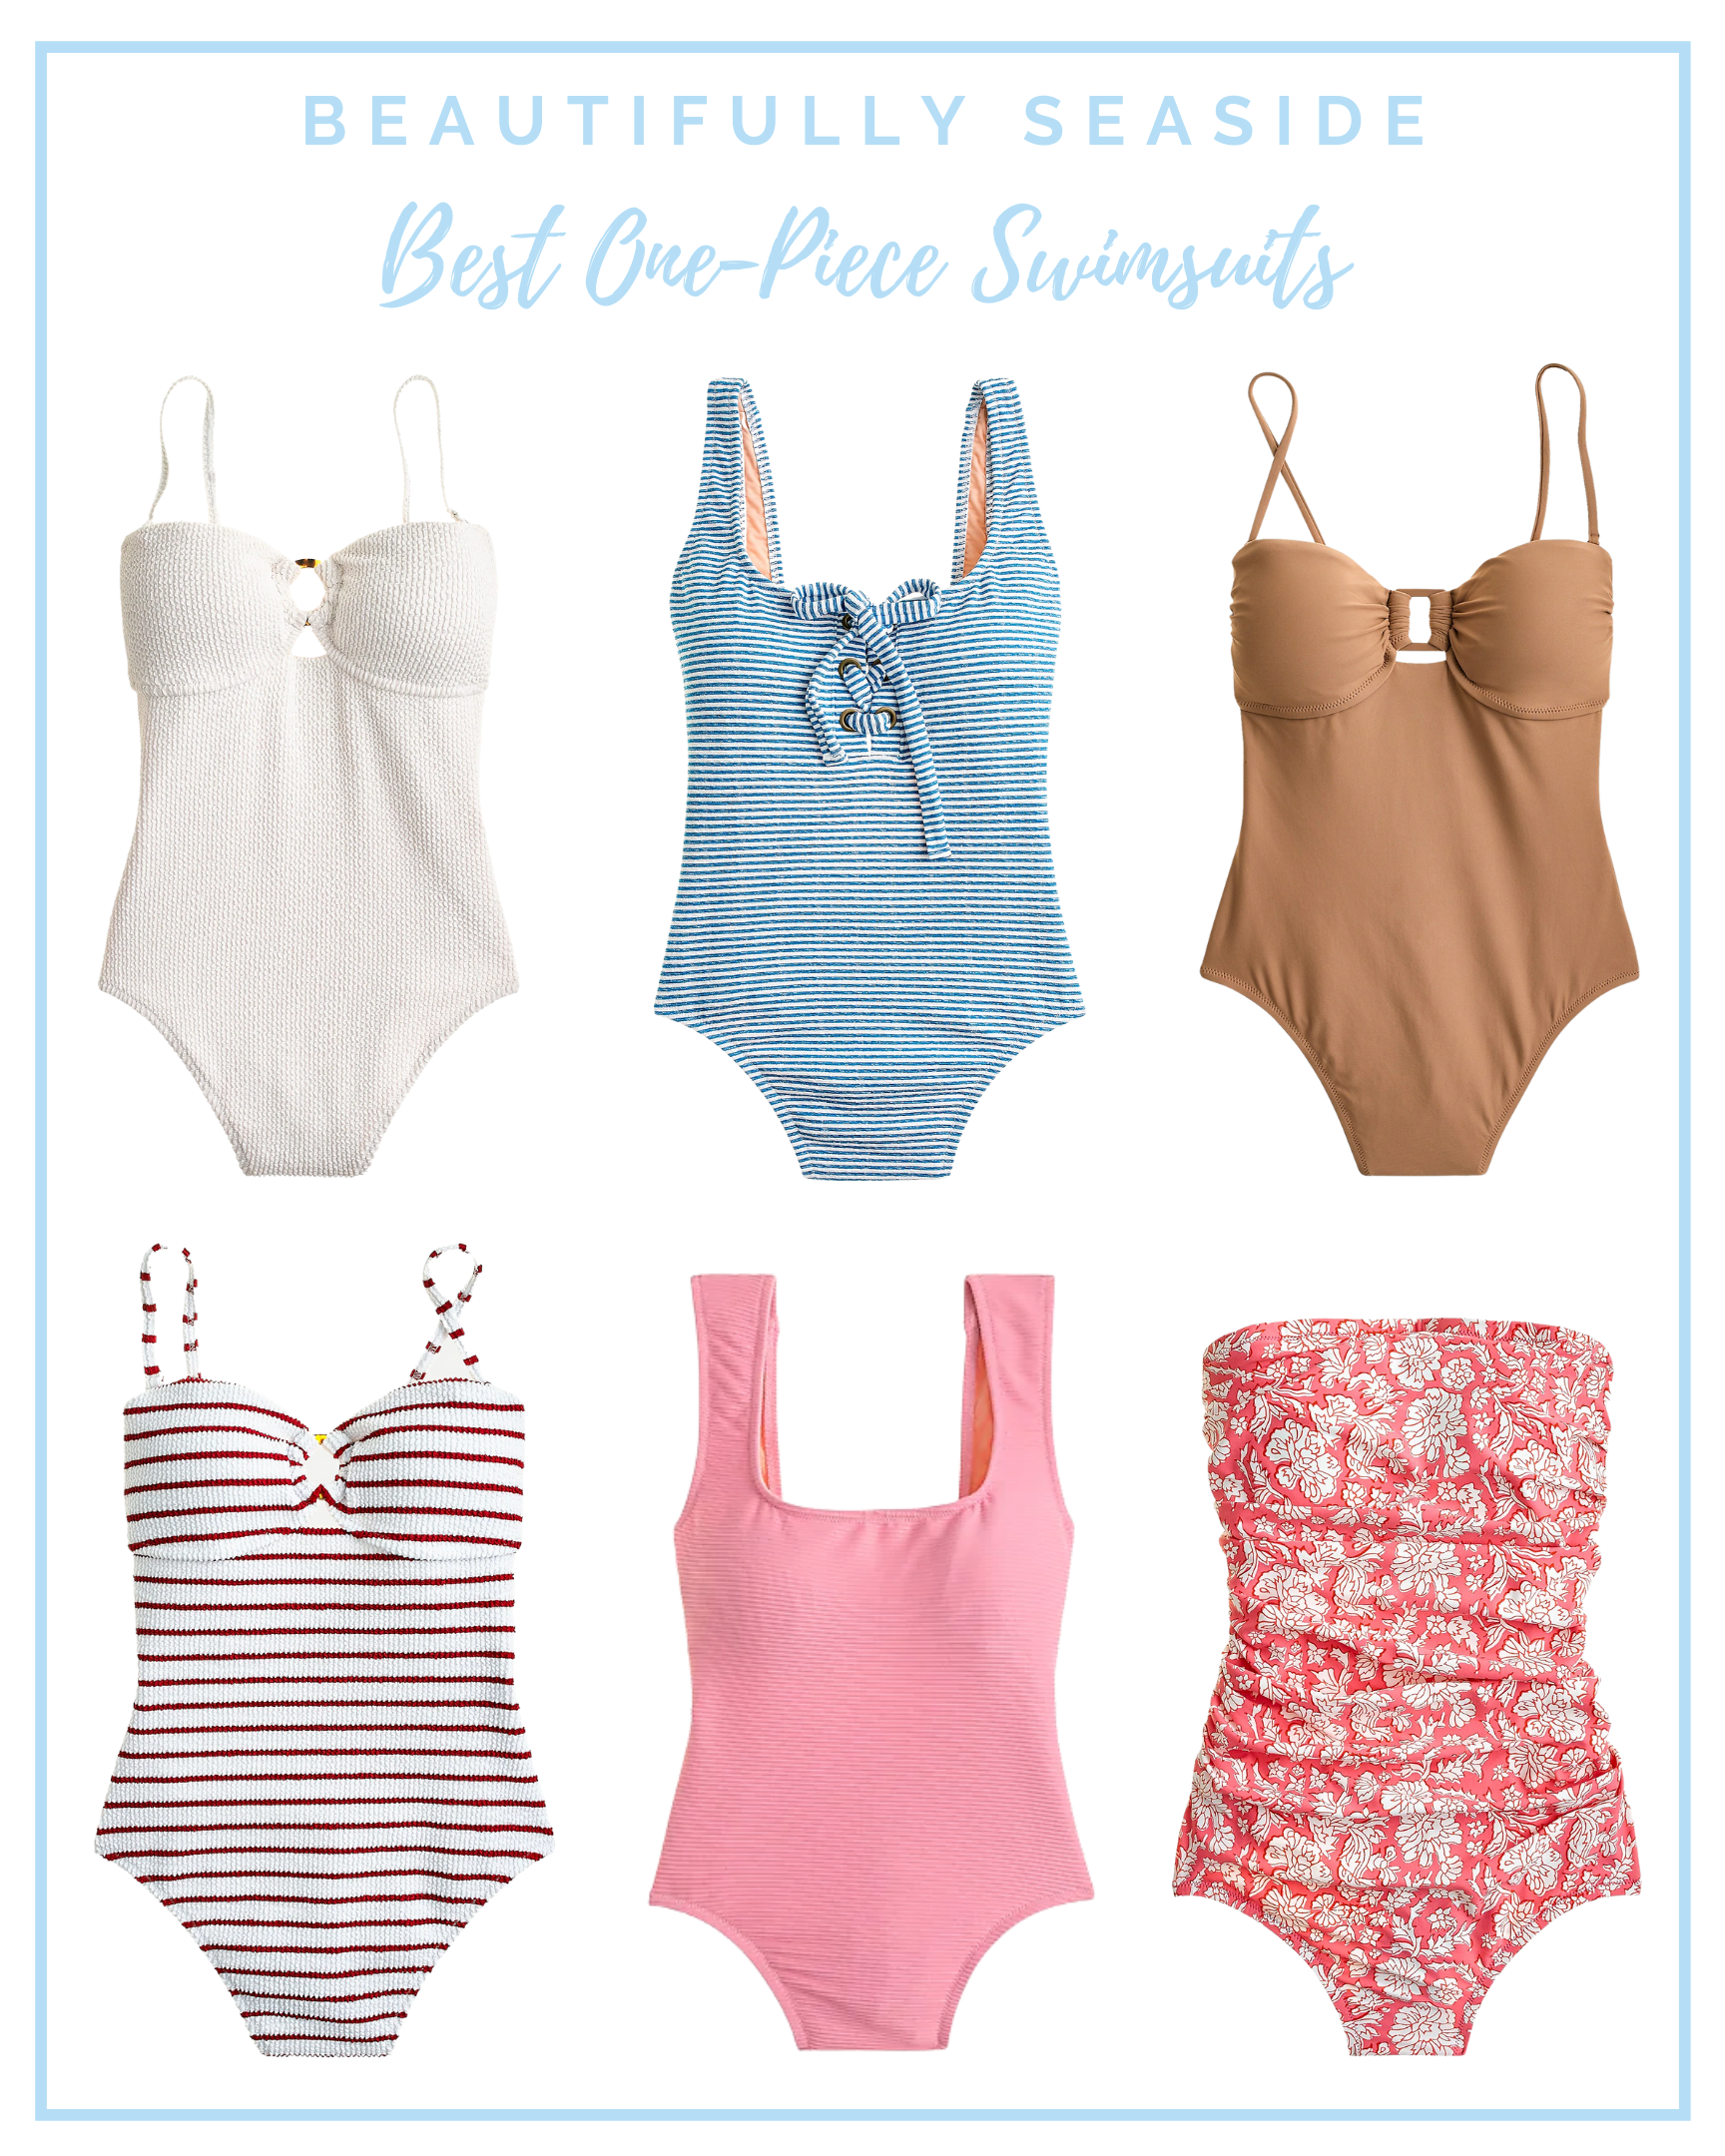 Desiree Leone of Beautifully Seaside features the best one piece swimsuits at J.Crew this summer. Shop these 2021 swimsuits on sale!